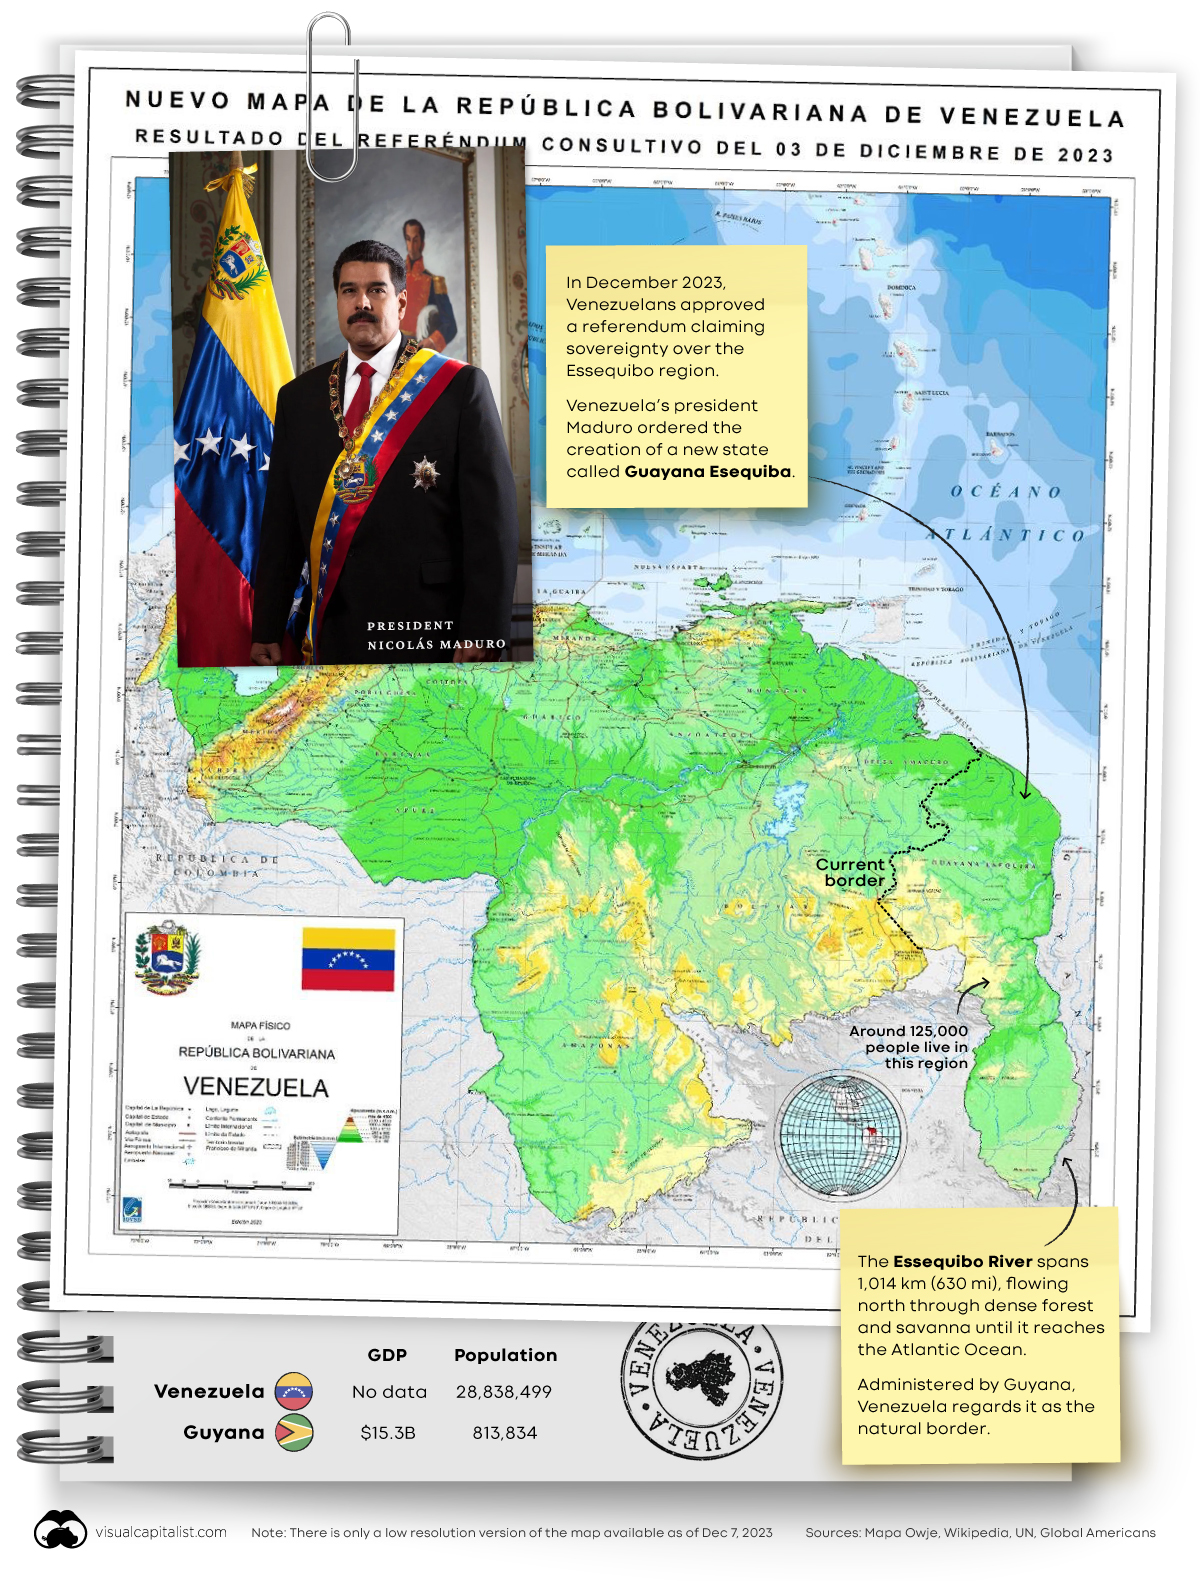 Maduro new map of Venezuela 2023 which includes the Essequibo region